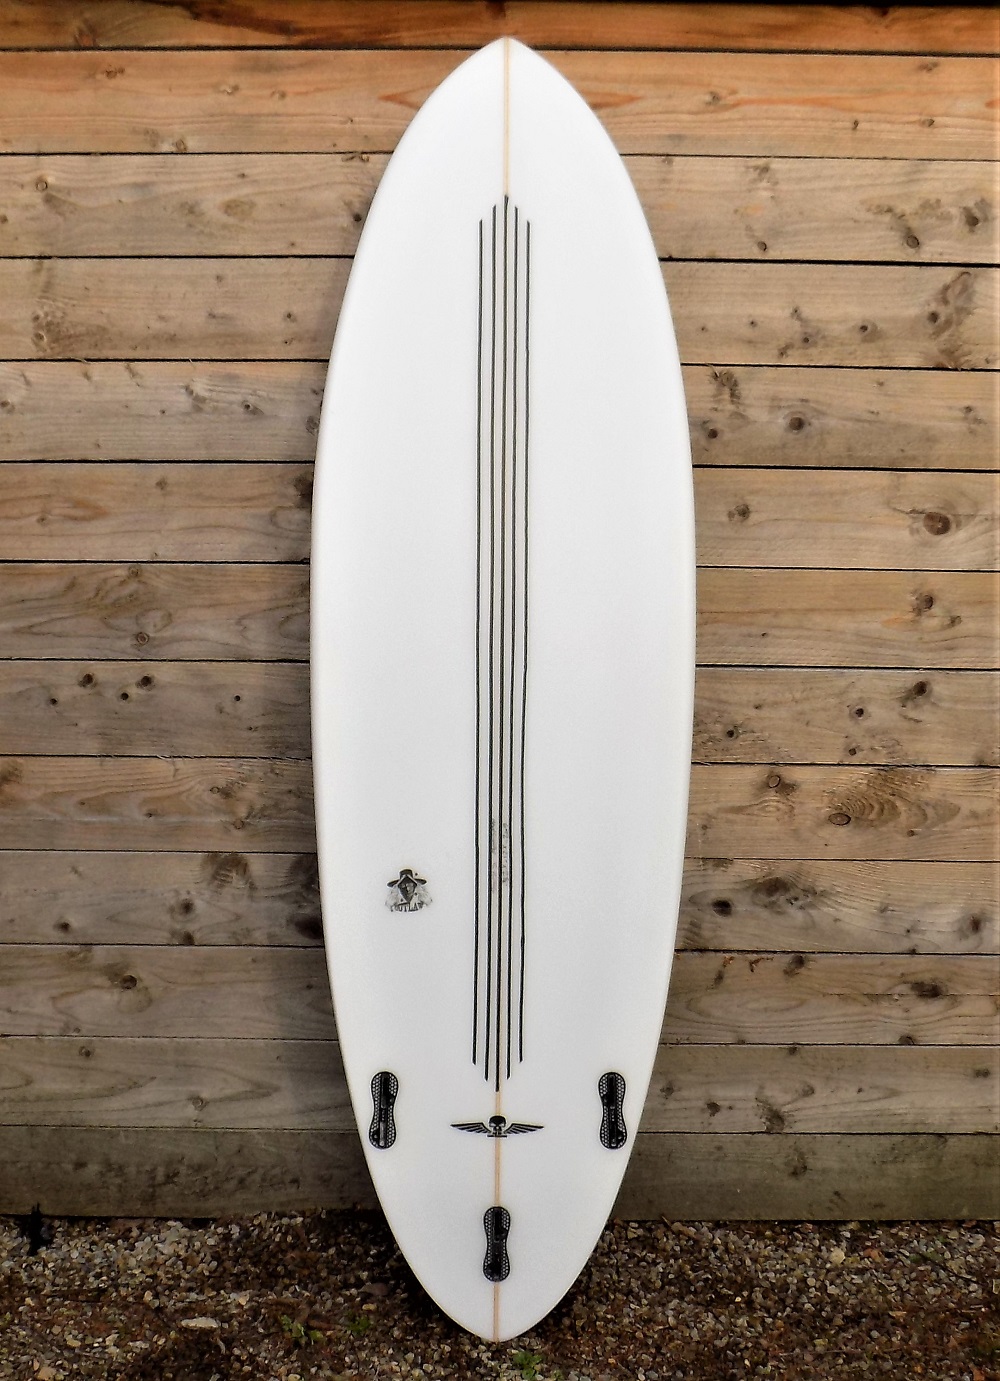 Surfboards UK, The Outlaw Shortboard